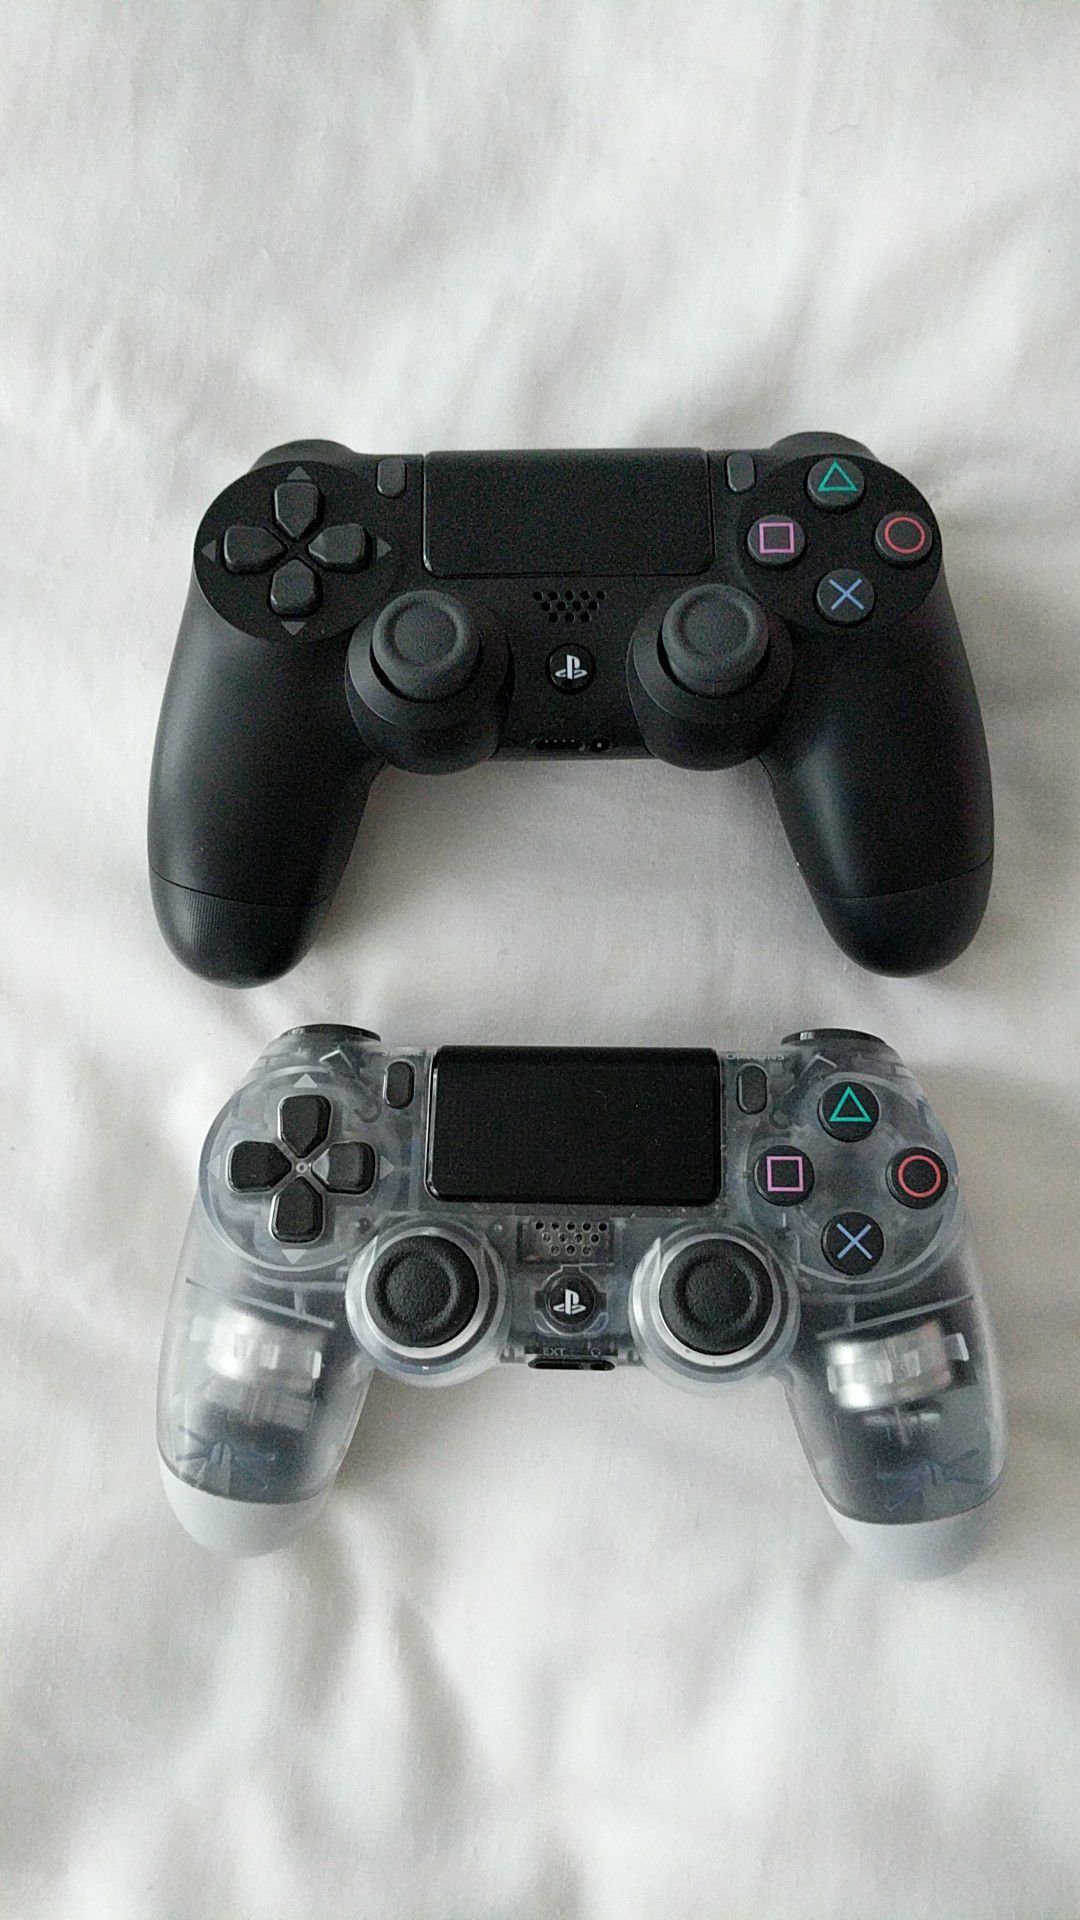 Ps4 dualshock controllers